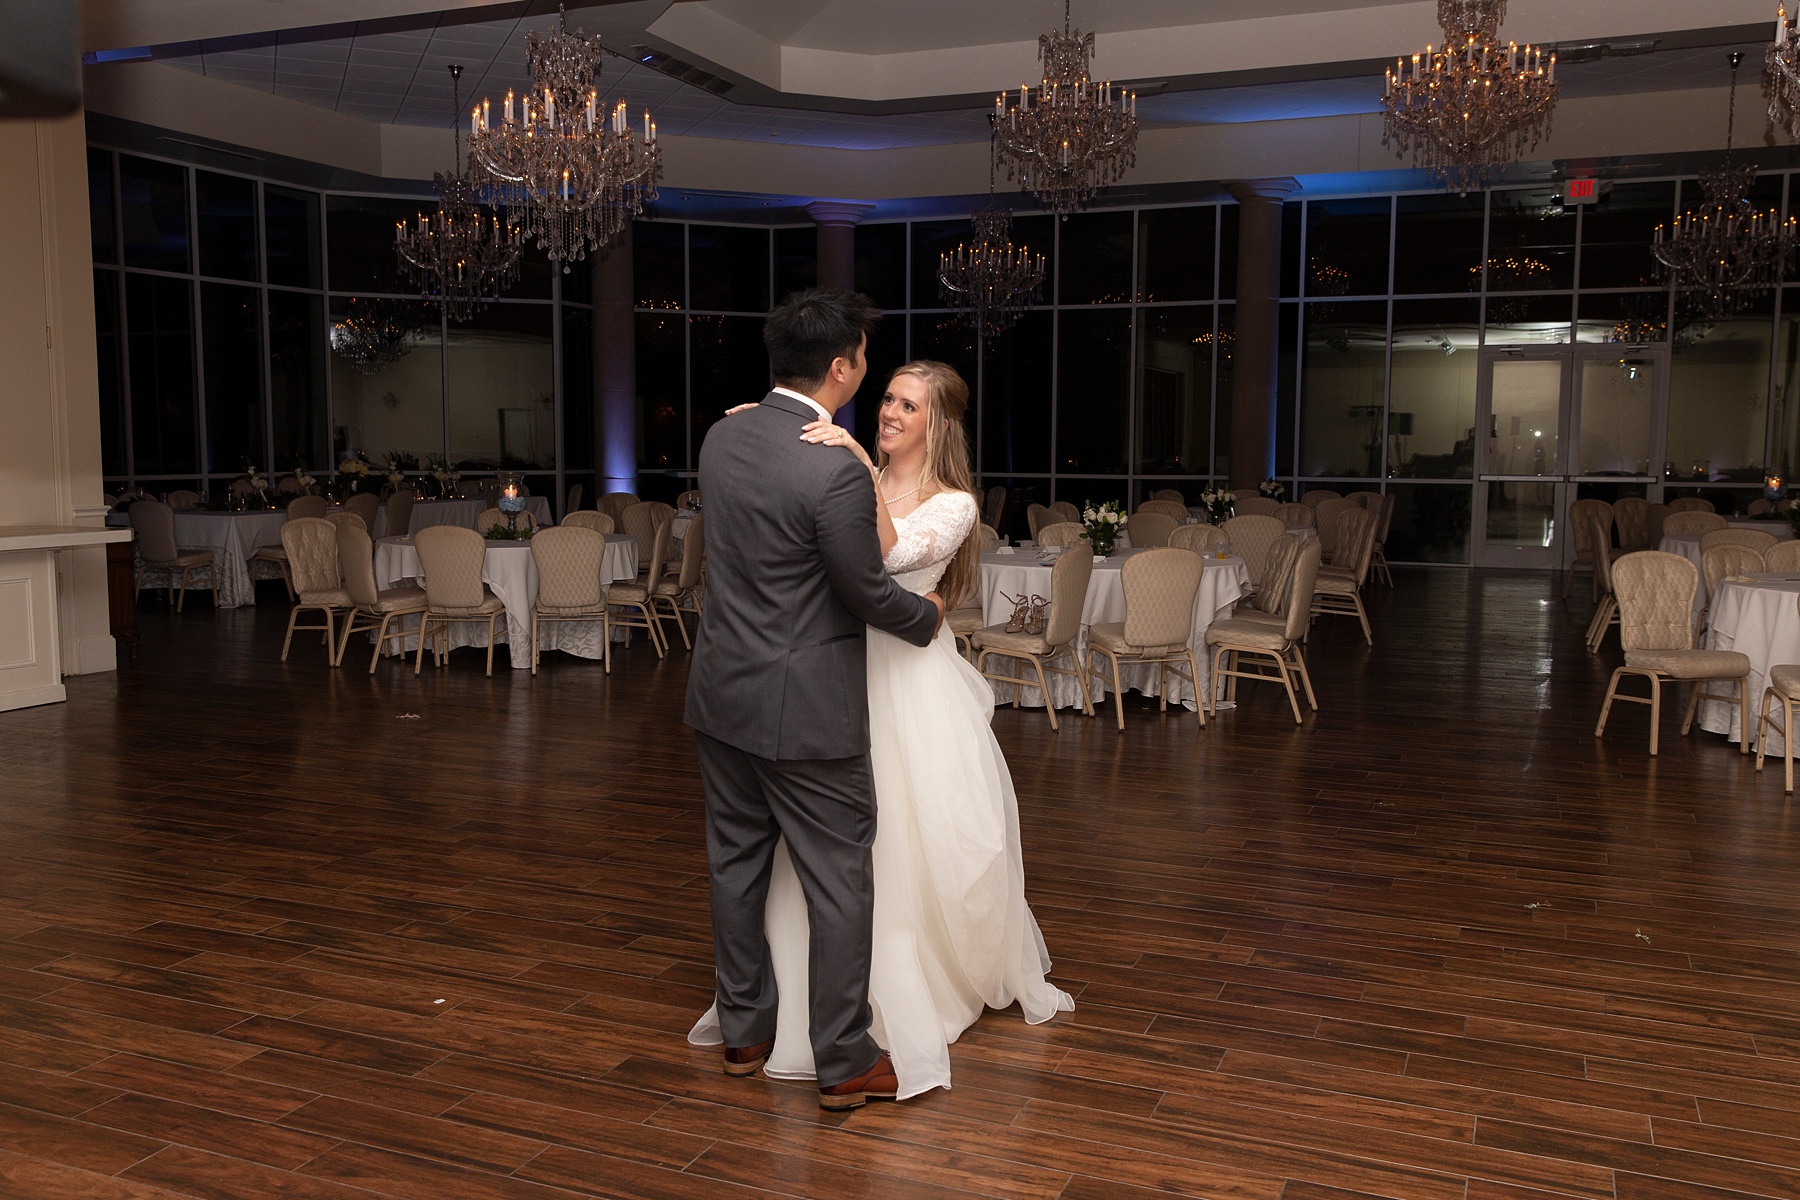 final private dance photographed by Randi Michelle Weddings at Ashton Gardens